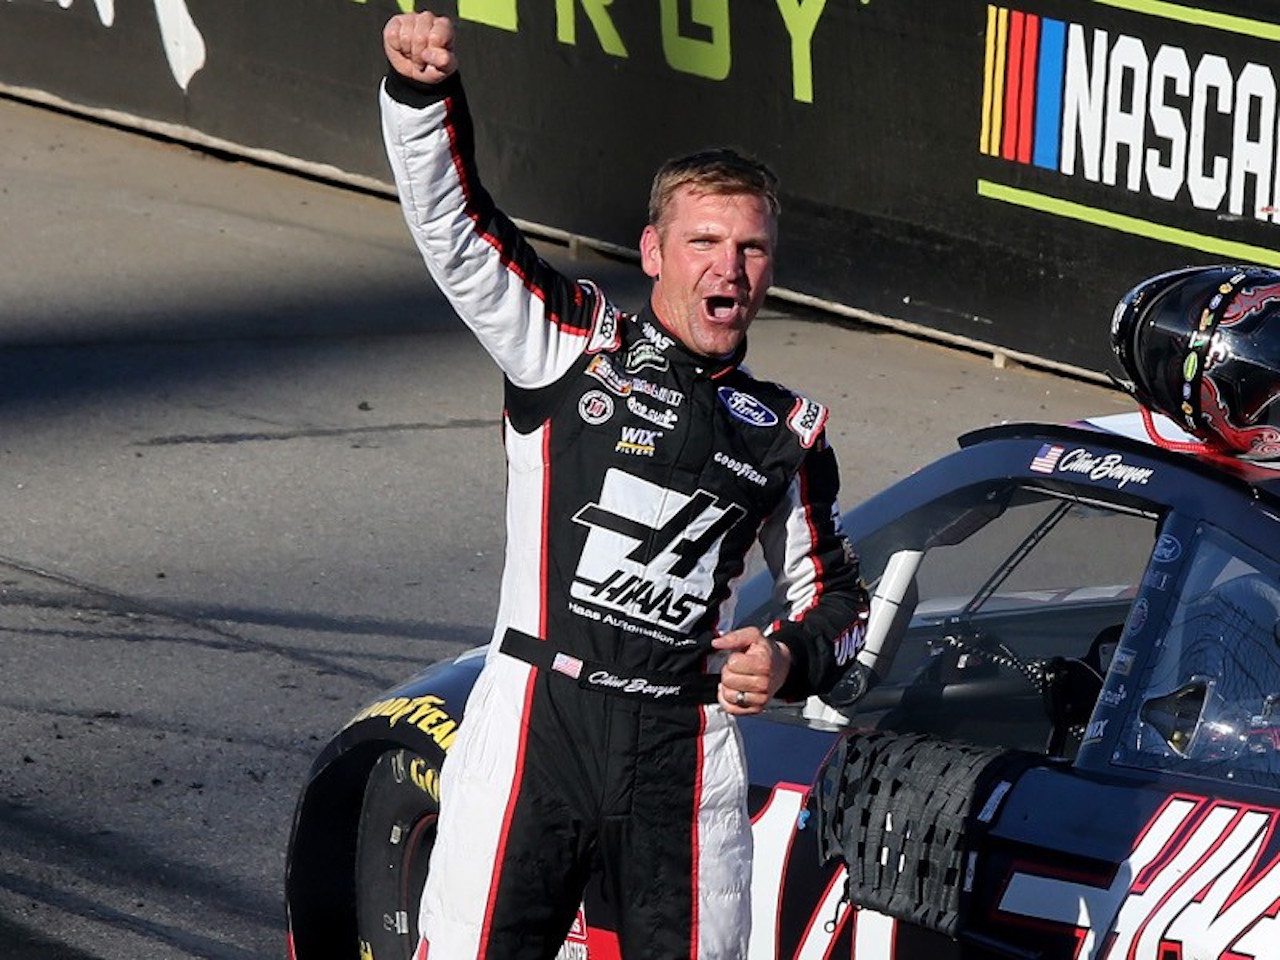 Clint Bowyer Roval 400